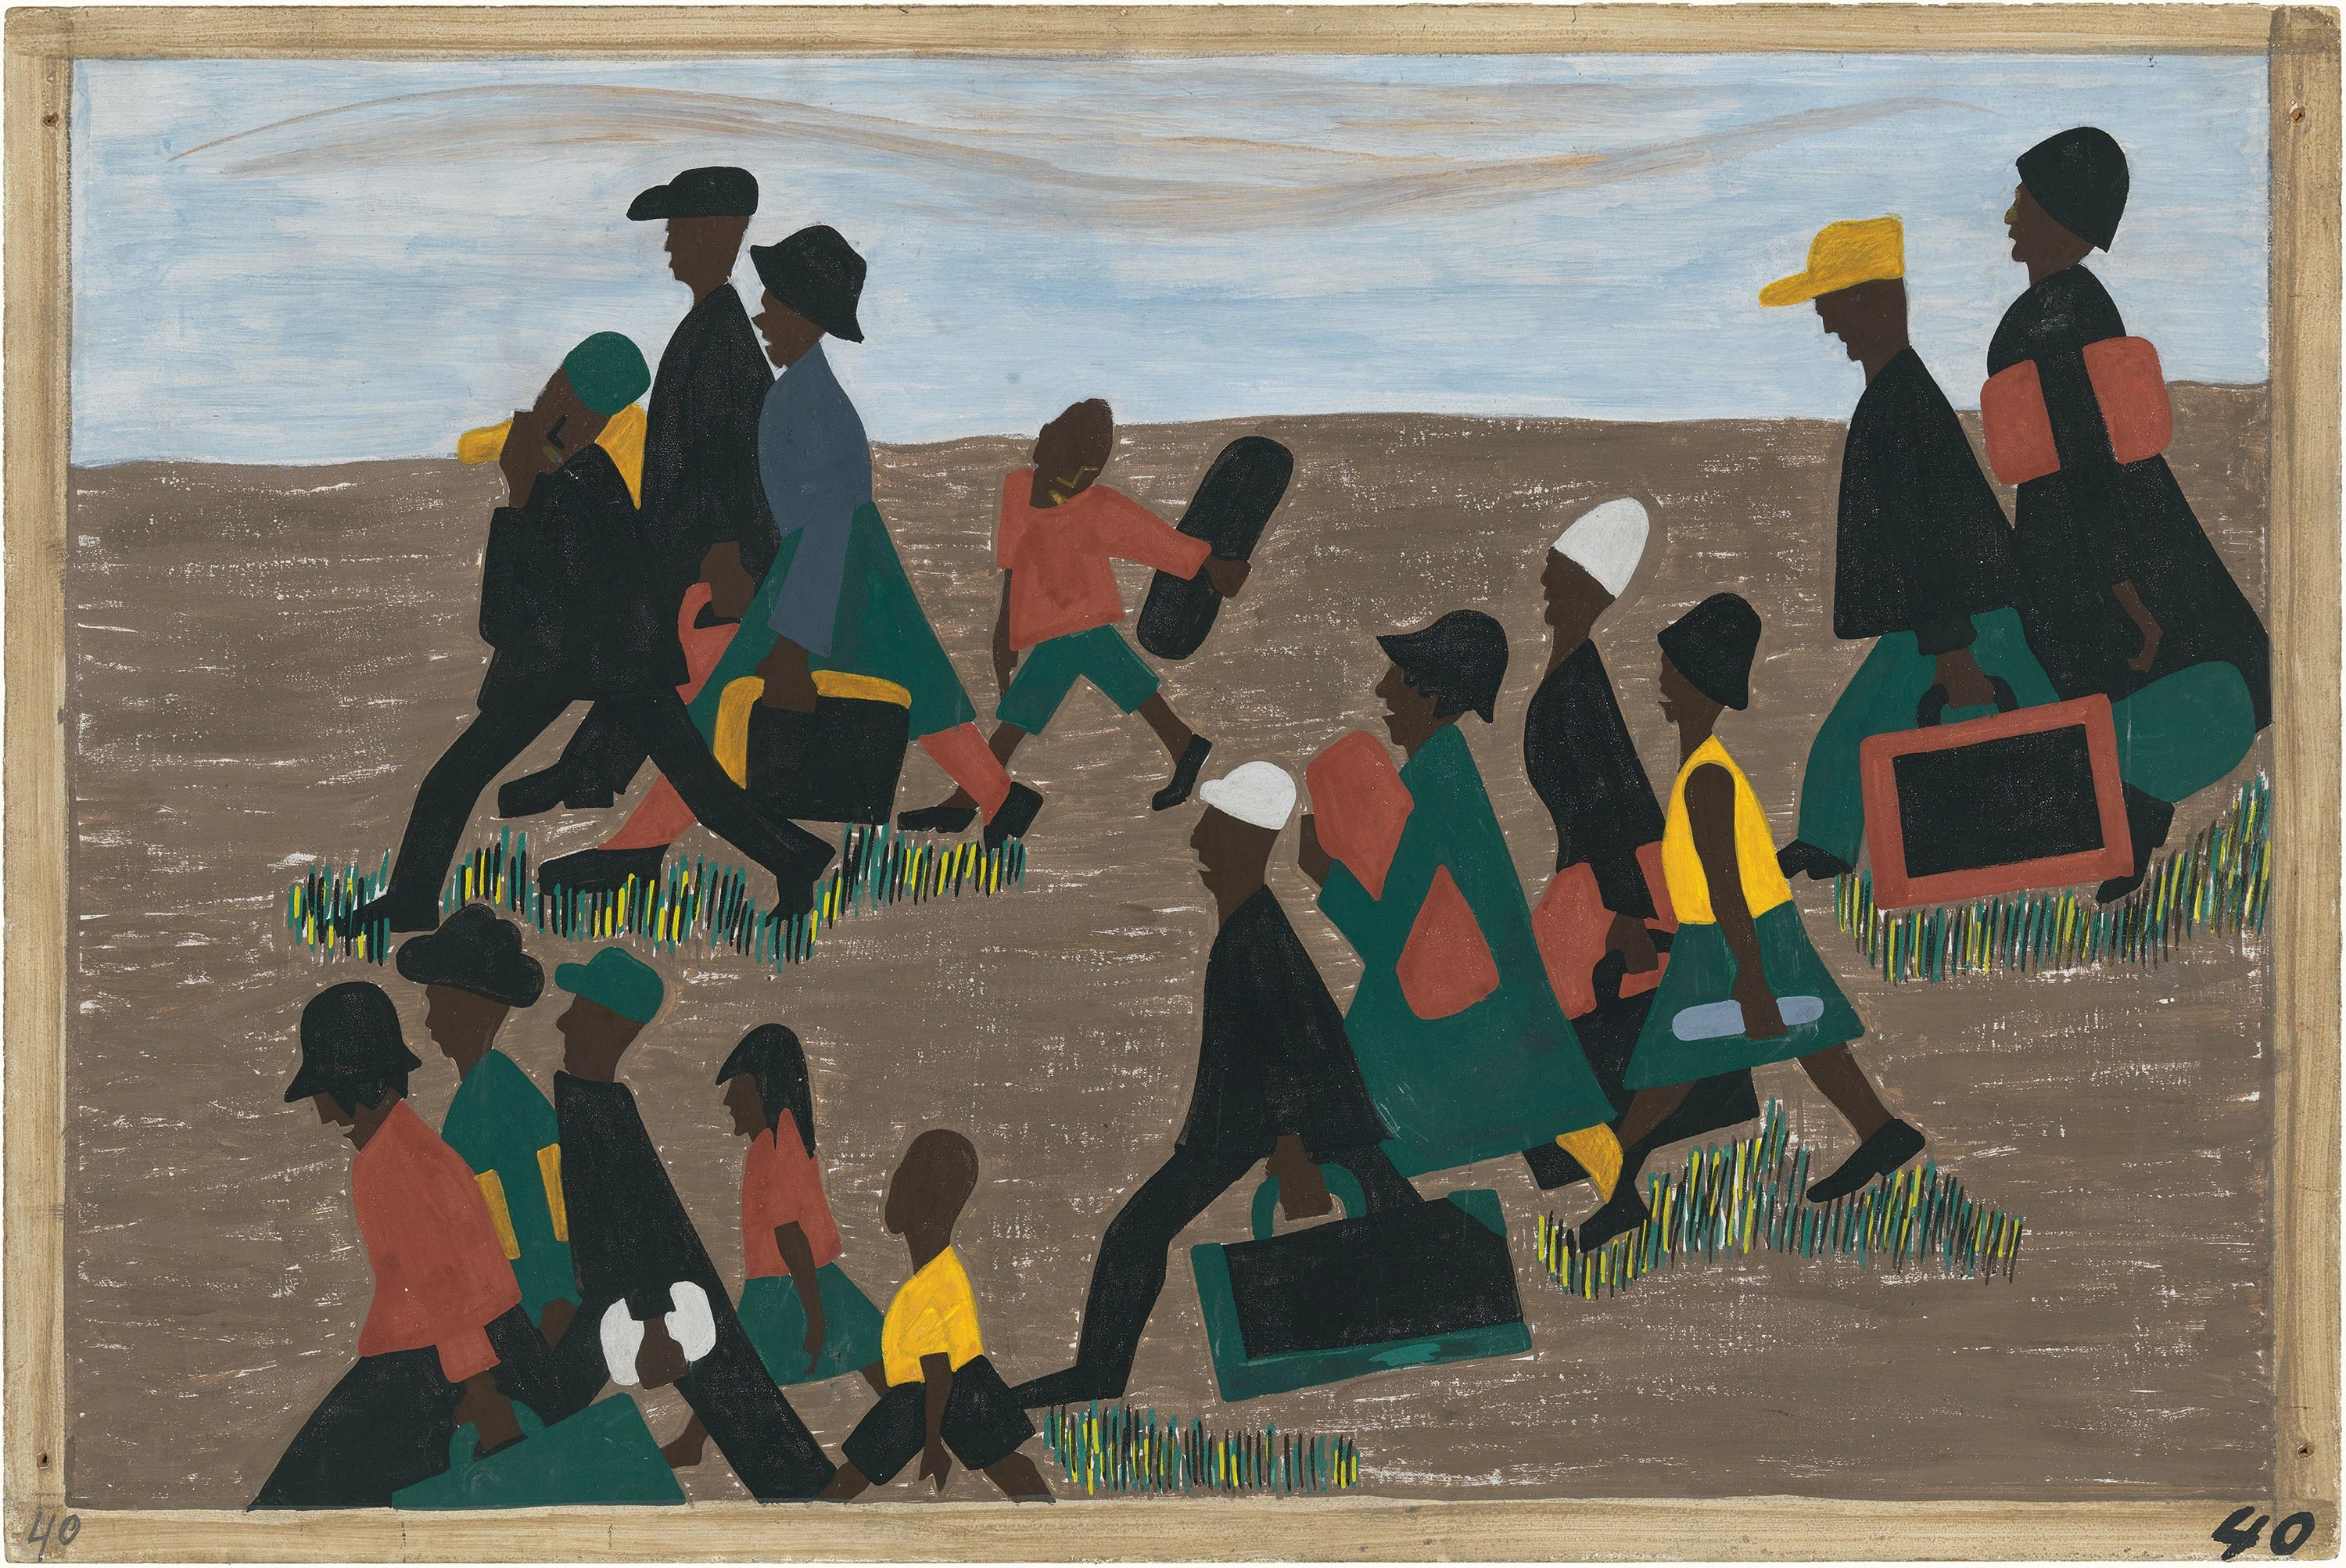 Migration Series No.40: The migrants arrived in great numbers, Jacob Lawrence